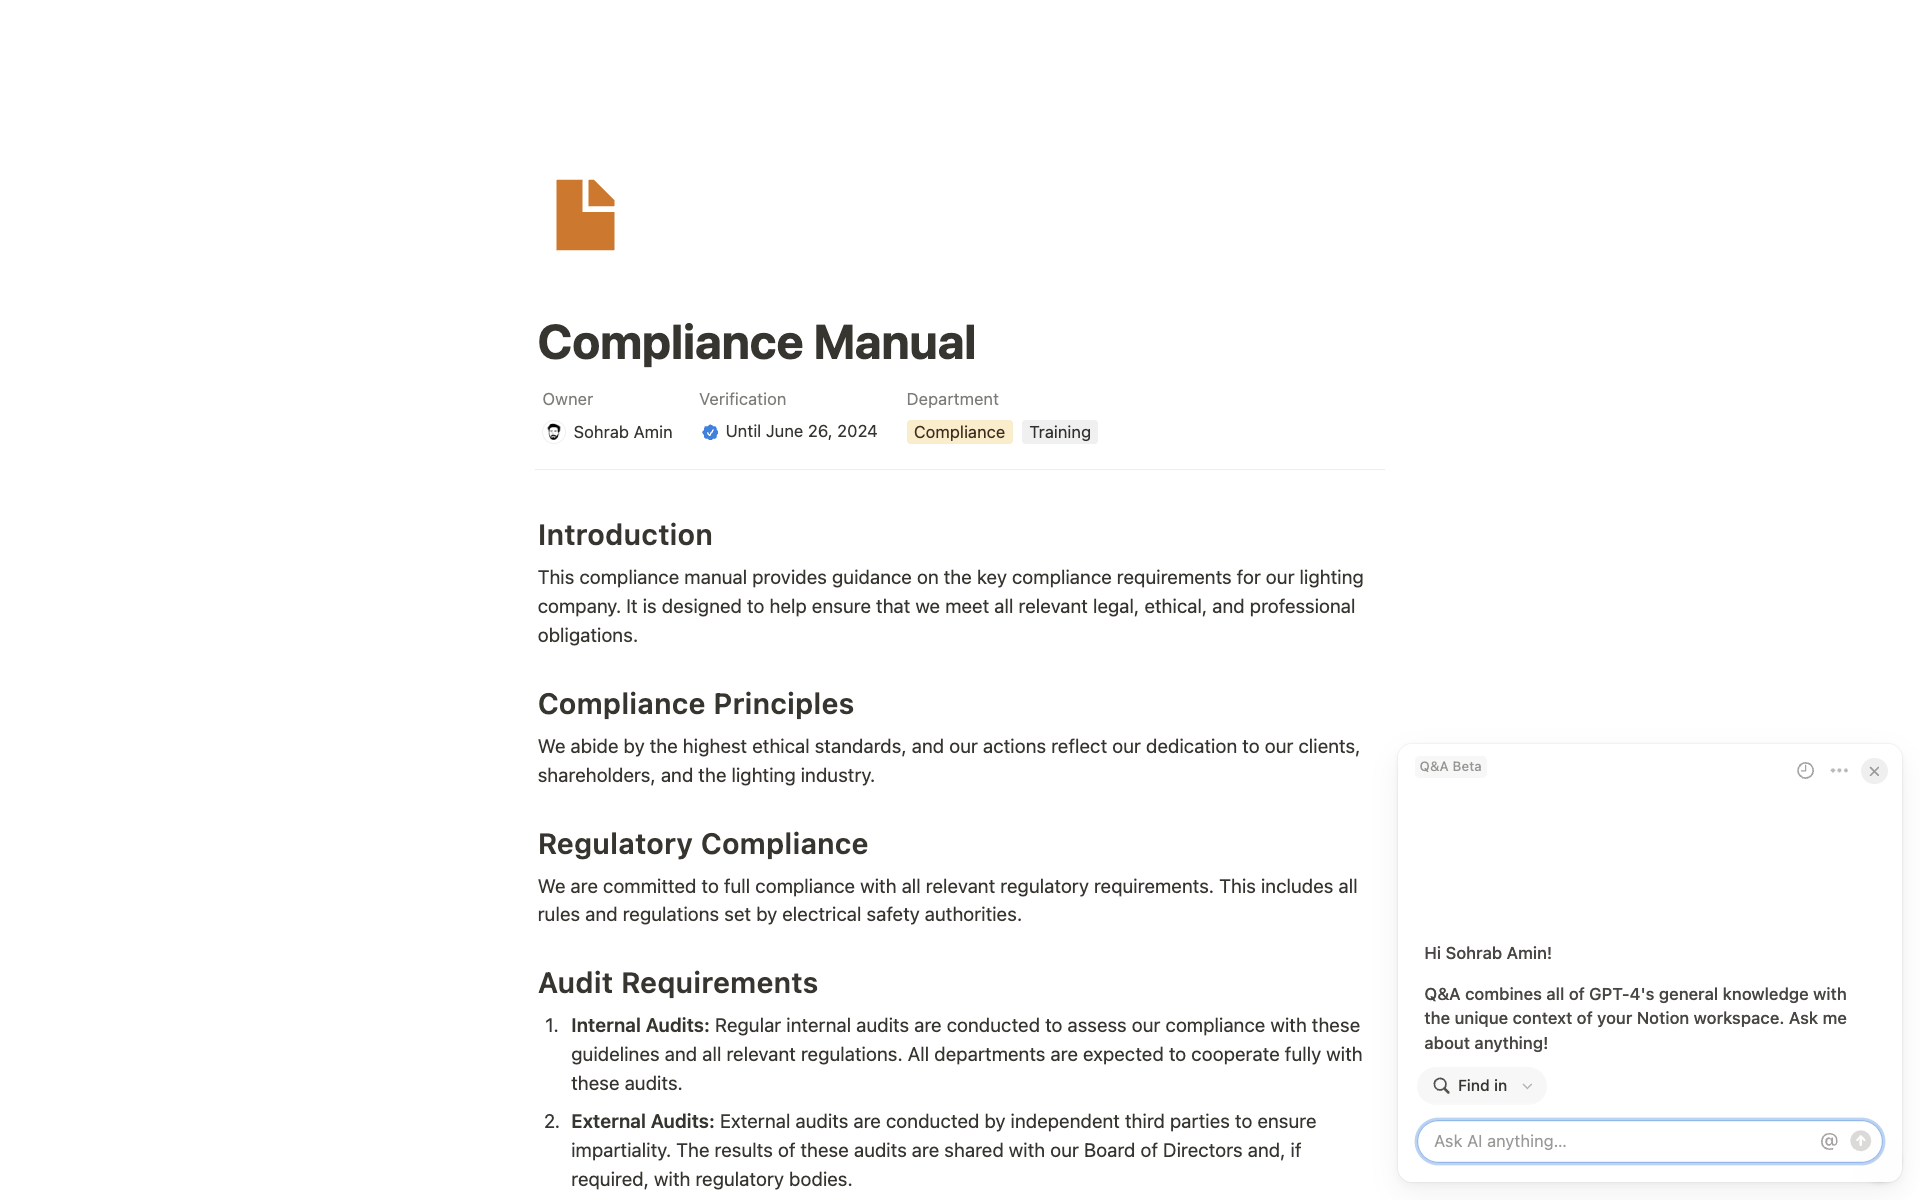 Ensure your team stays compliant with this AI-powered Compliance Hub template, designed to streamline legal and regulatory processes.